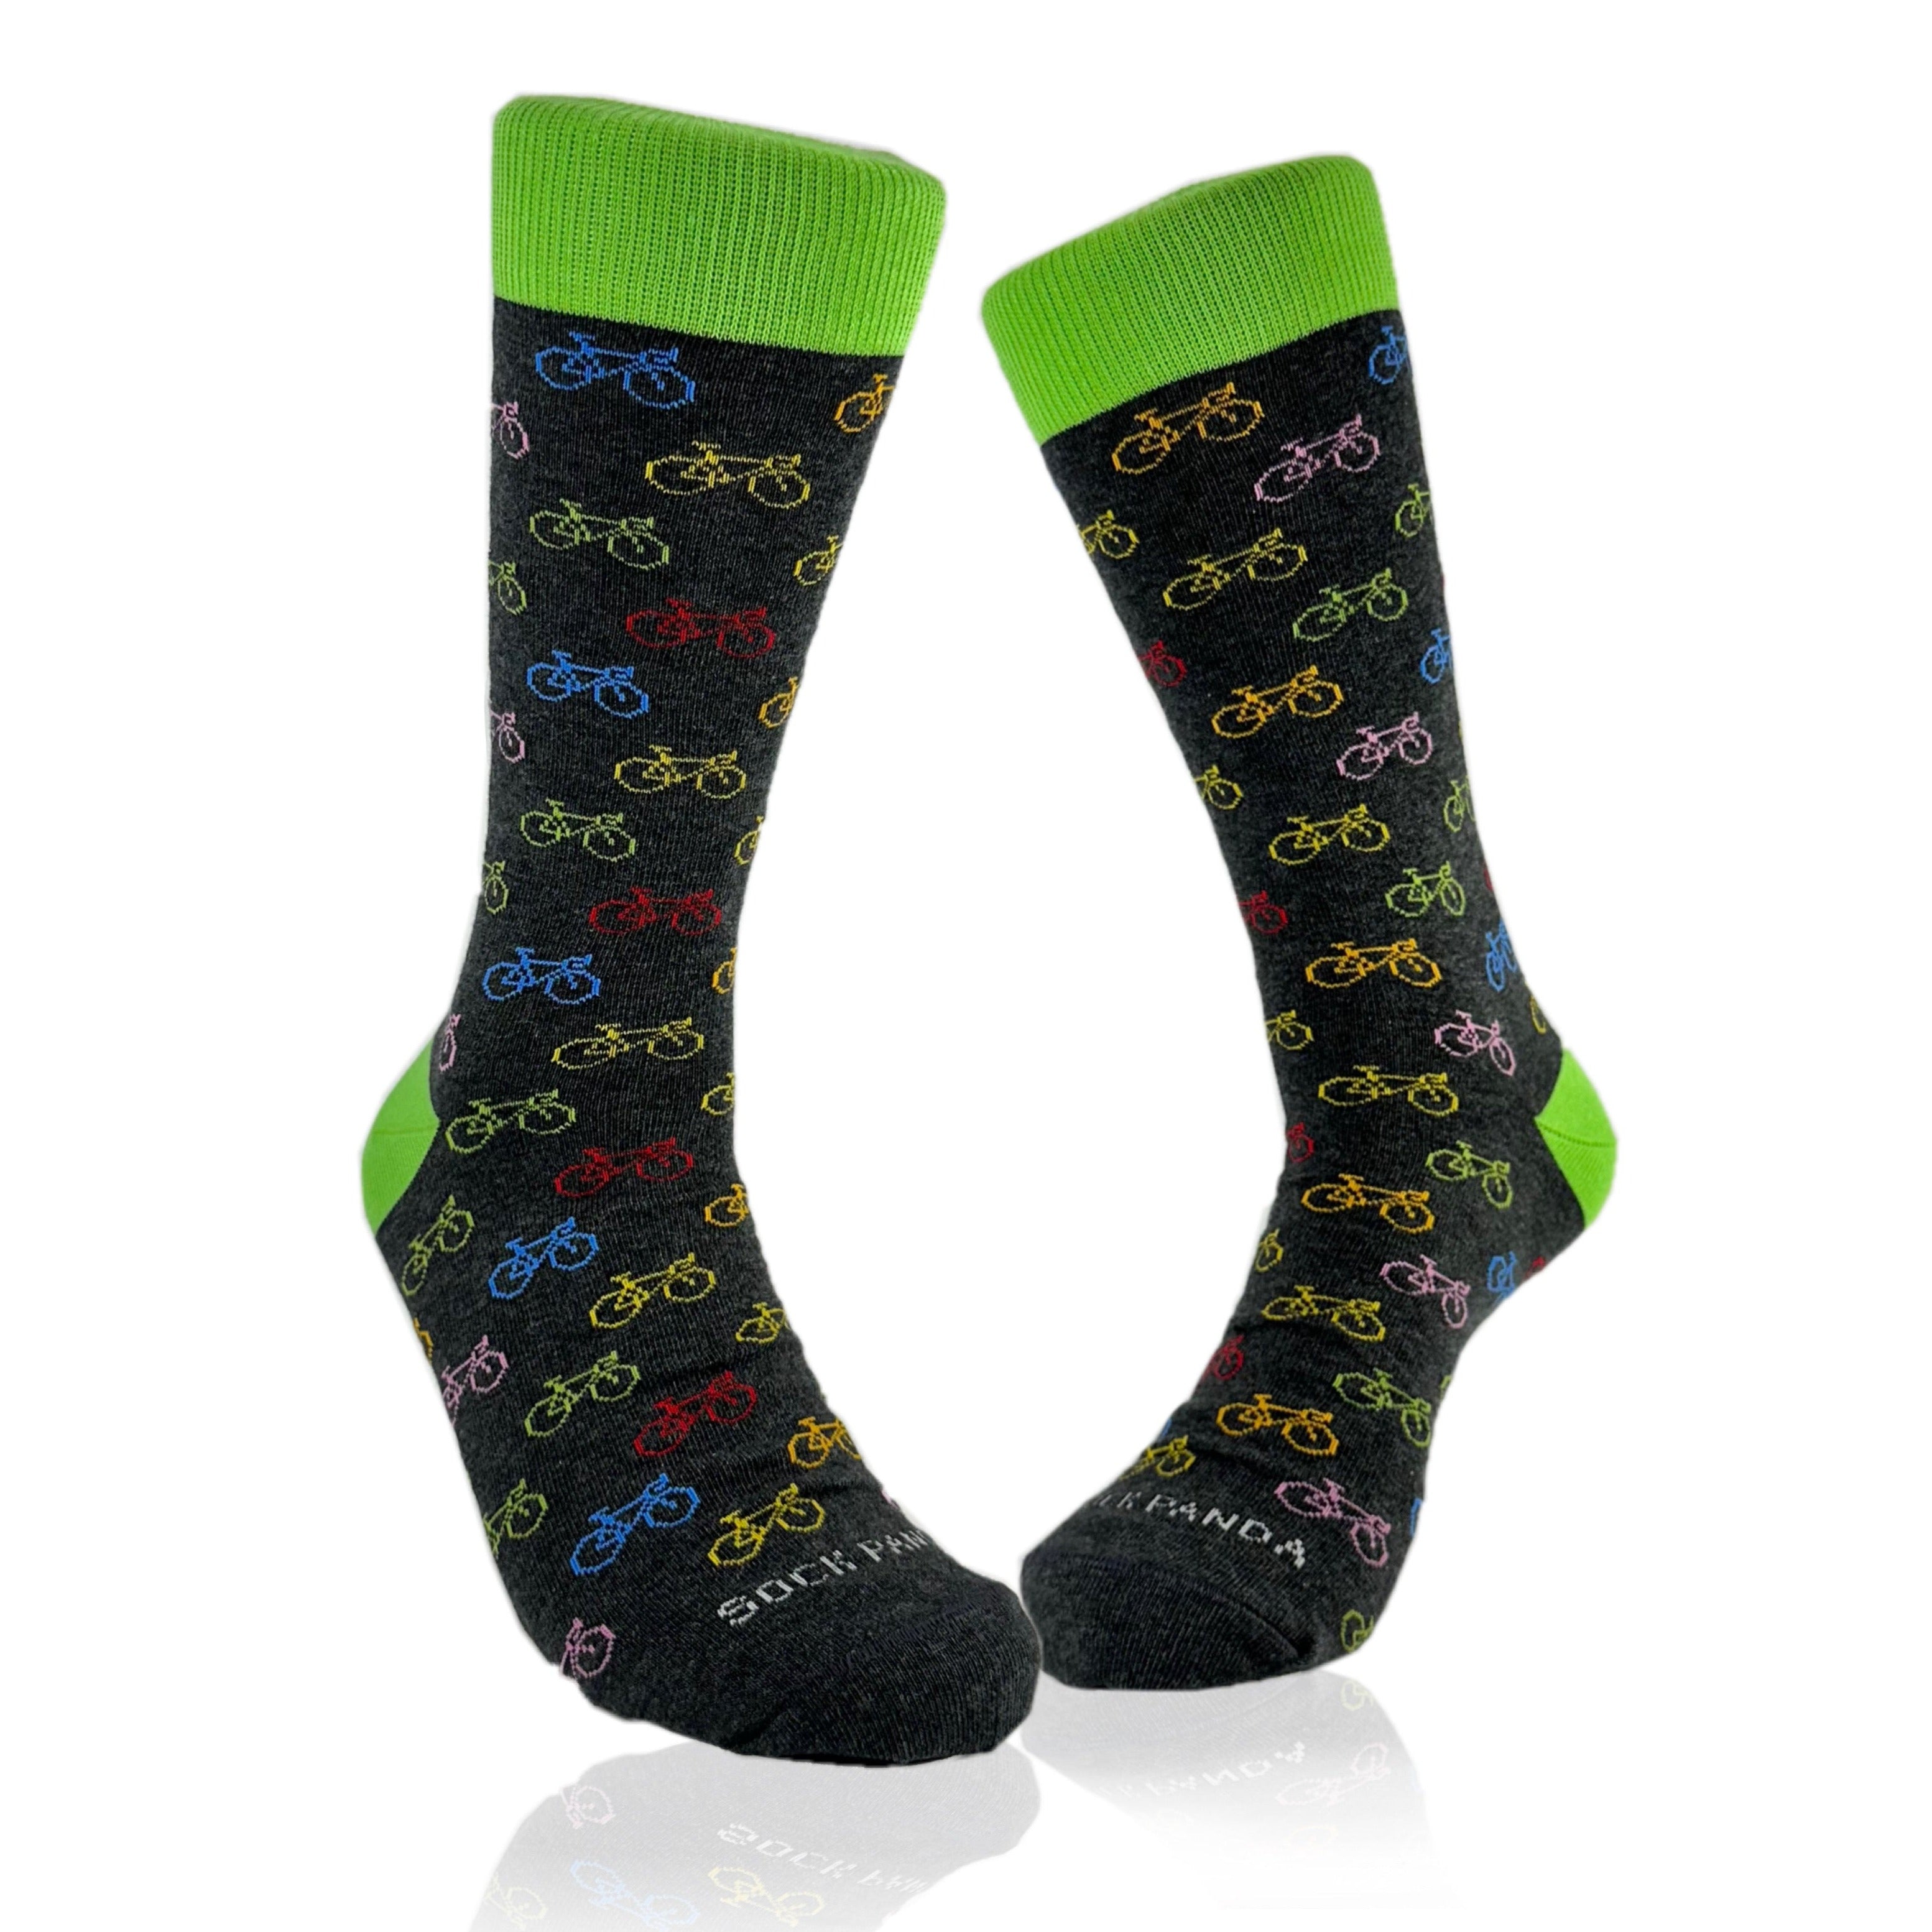 Colorful Bicycle Pattern Socks from the Sock Panda (Adult Large)